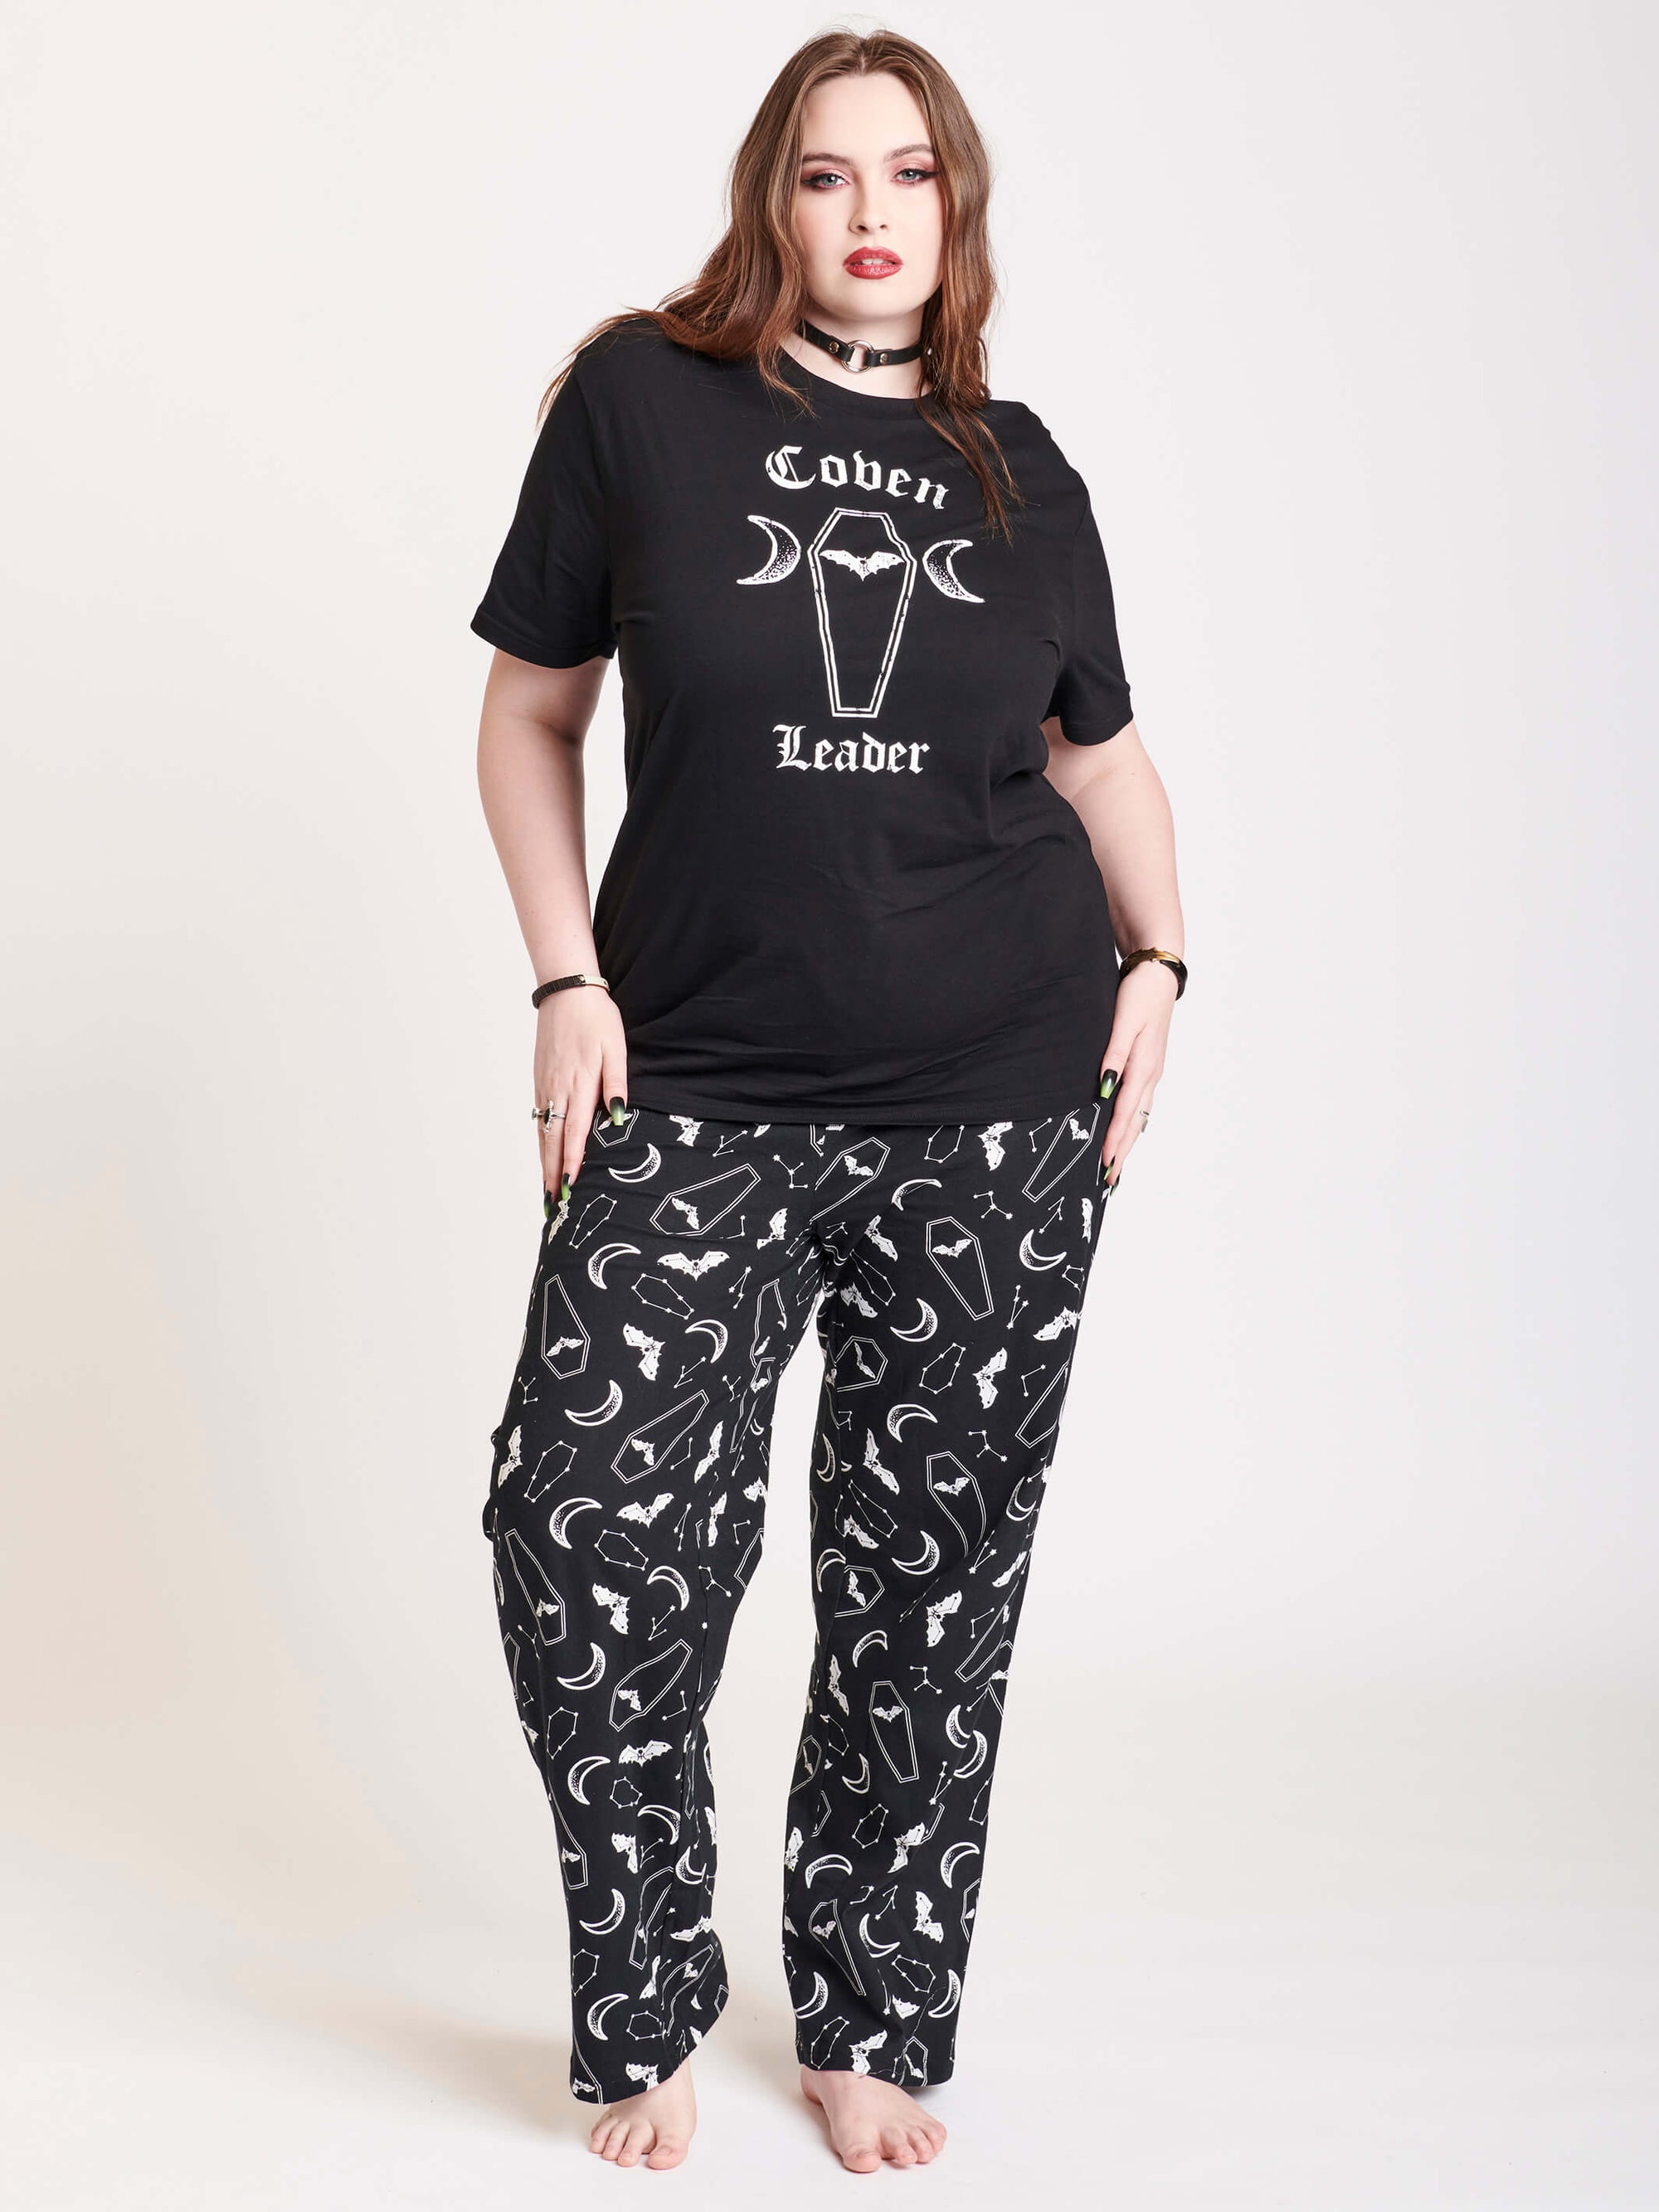 black t-shirt and sleep pants with coffin motif